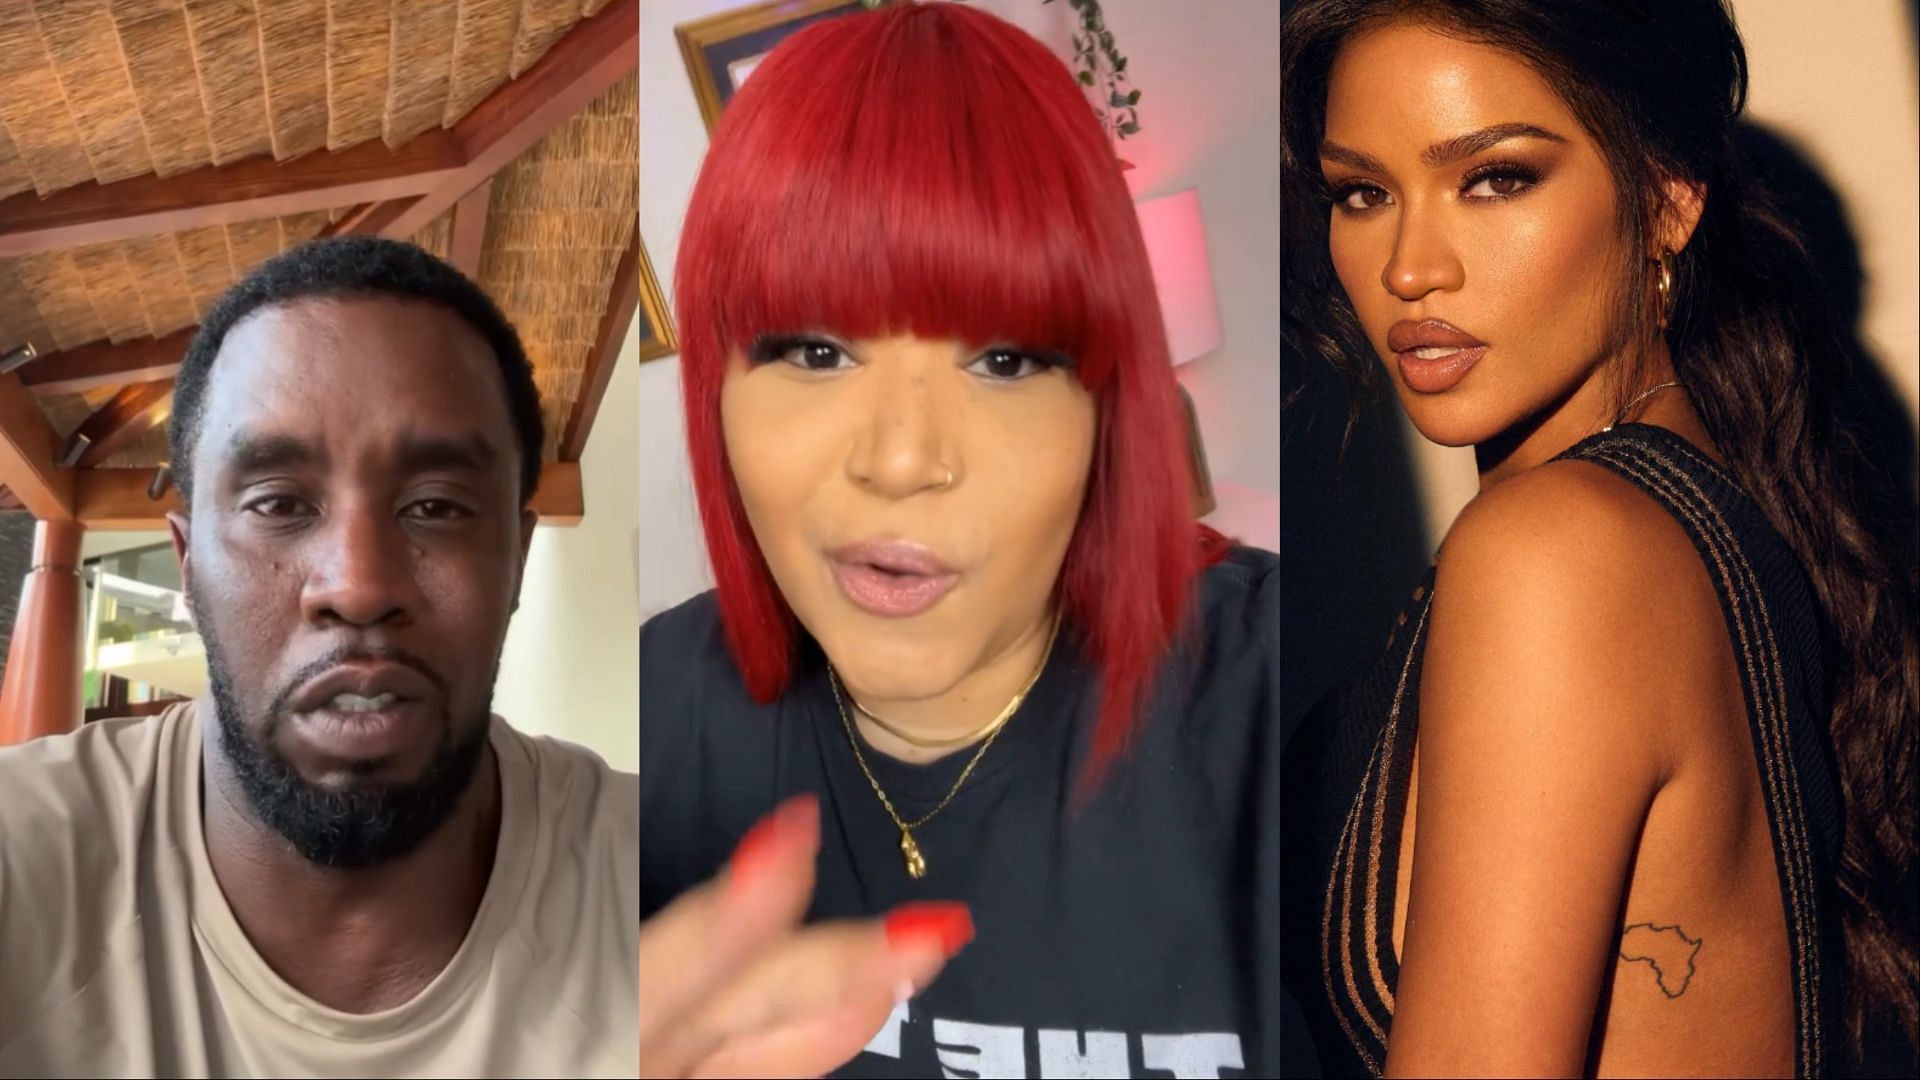 Tiffany Red addresses silence over Diddy- Cassie Ventura surveillance footage incident (Image via diddy, iamtiffanyred and cassie/Instagram)